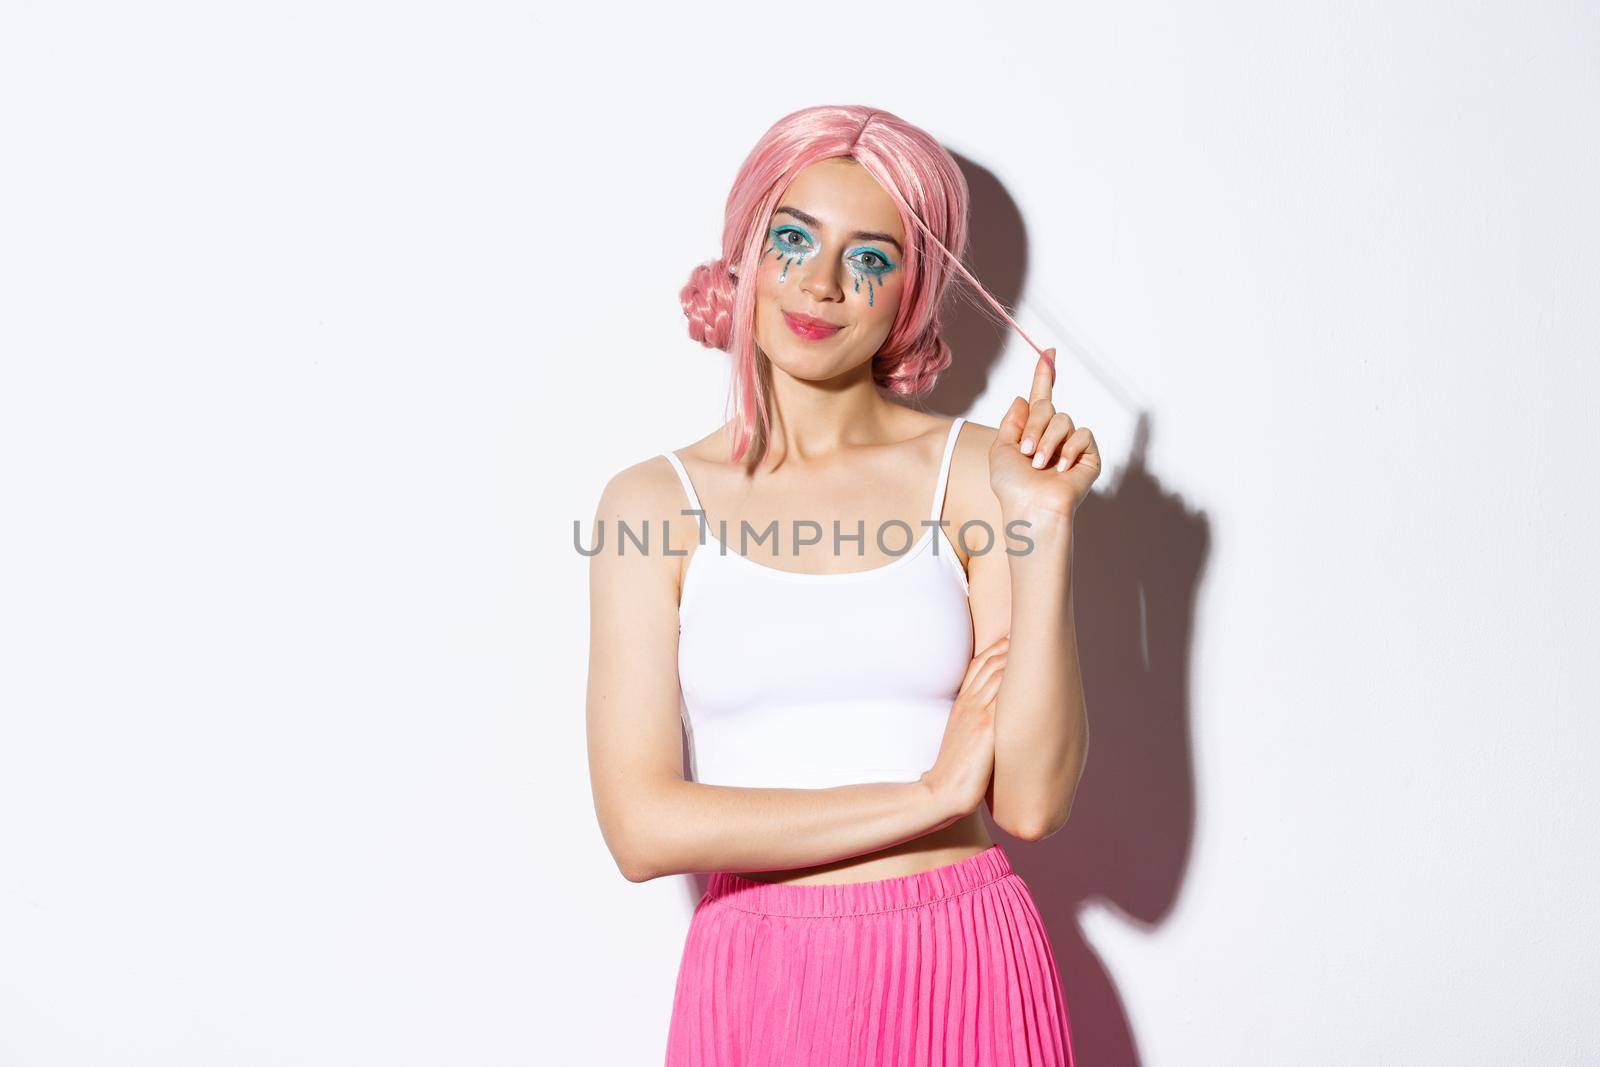 Image of beautiful female model in halloween outfit, wearing pink wig and colorful clothes, smiling at camera, standing over white background.